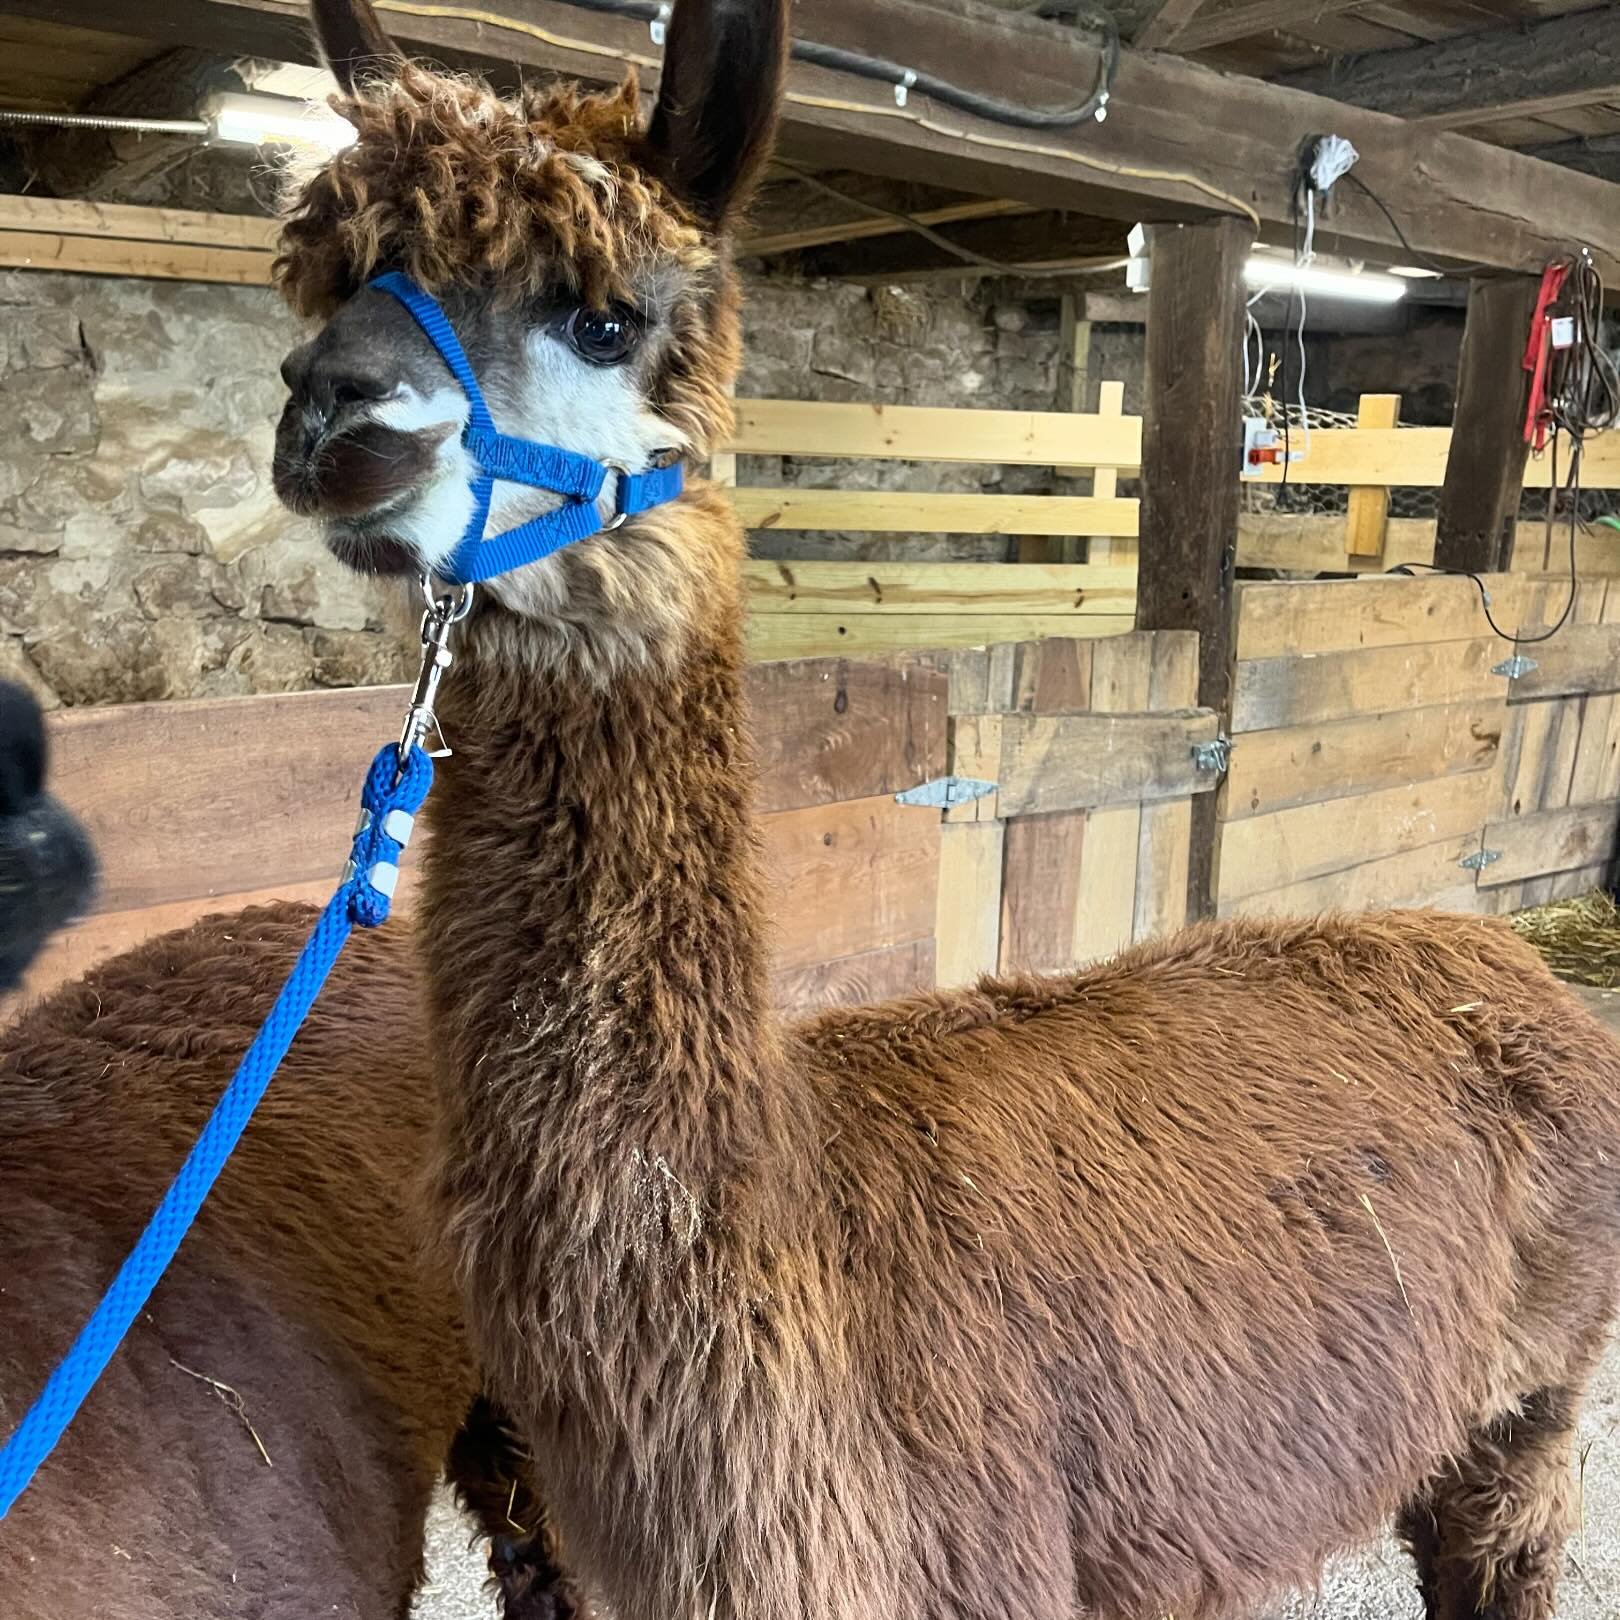 Tia is due any day now! If our timing is right&hellip;she should have her cria by Sunday at the latest!

What day do you think she will give birth? #alpaca #berkscountypa